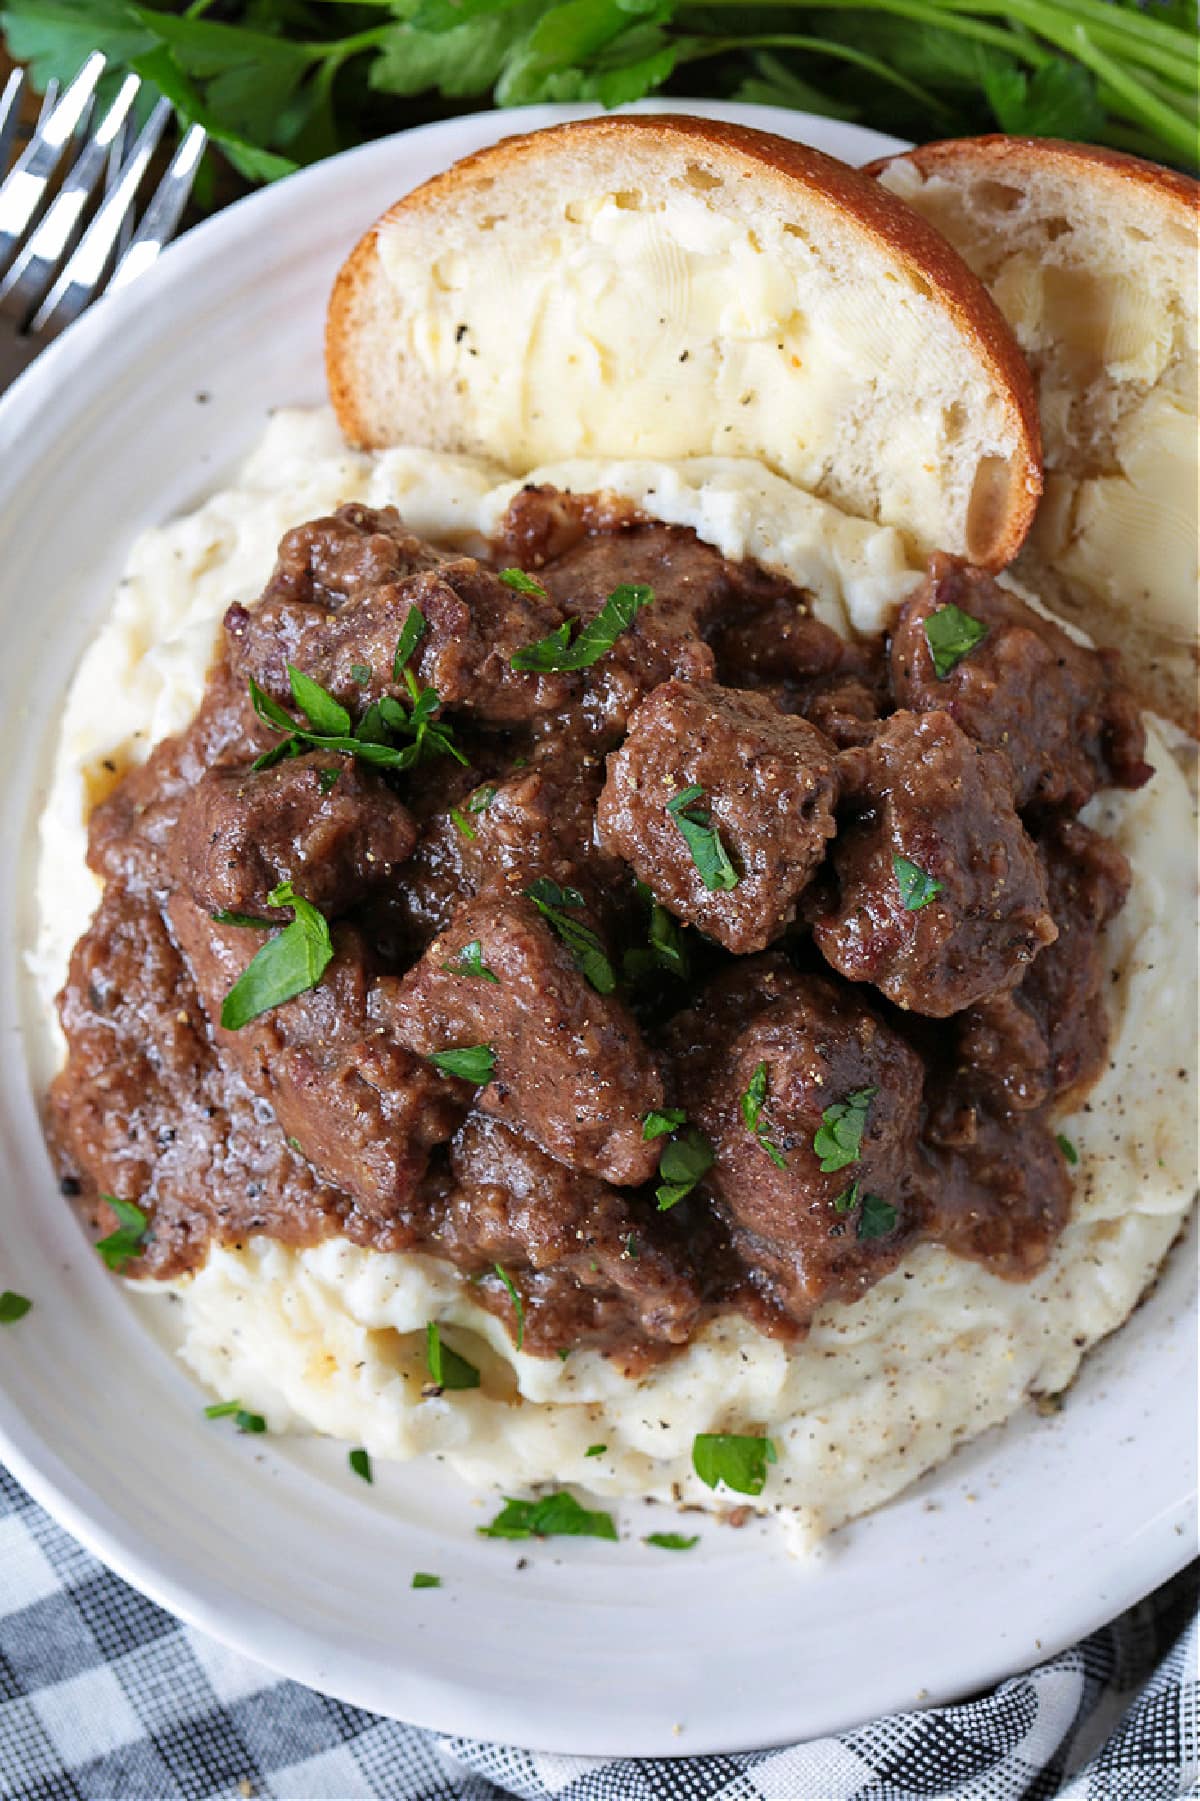 beef tips and gravy on mashed potatoes with bread and butter